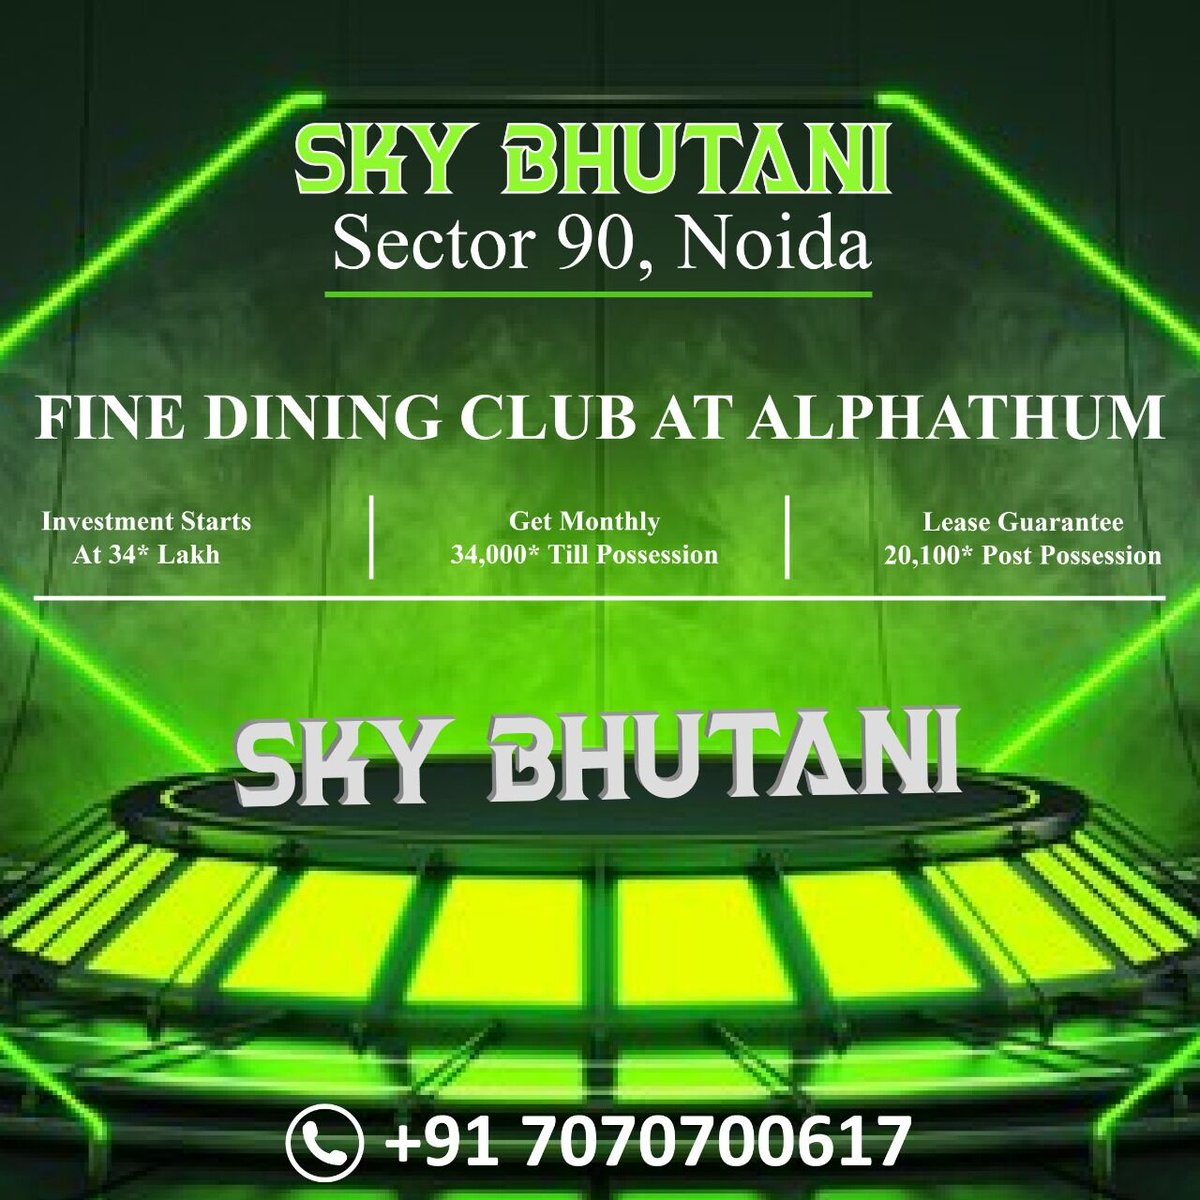 Sky Bhutani 
📍Sector-90, Noida

- Get monthly 34000 till possession
- Investment starts 34 lac﹡
- 25% Revenue Sharing post possession

📞7070700617 

#TheHeenaRealtyMakers #realestate #alphathum #noida #dine #skybhutani #realtor #realty #investment #retailproperties #investor